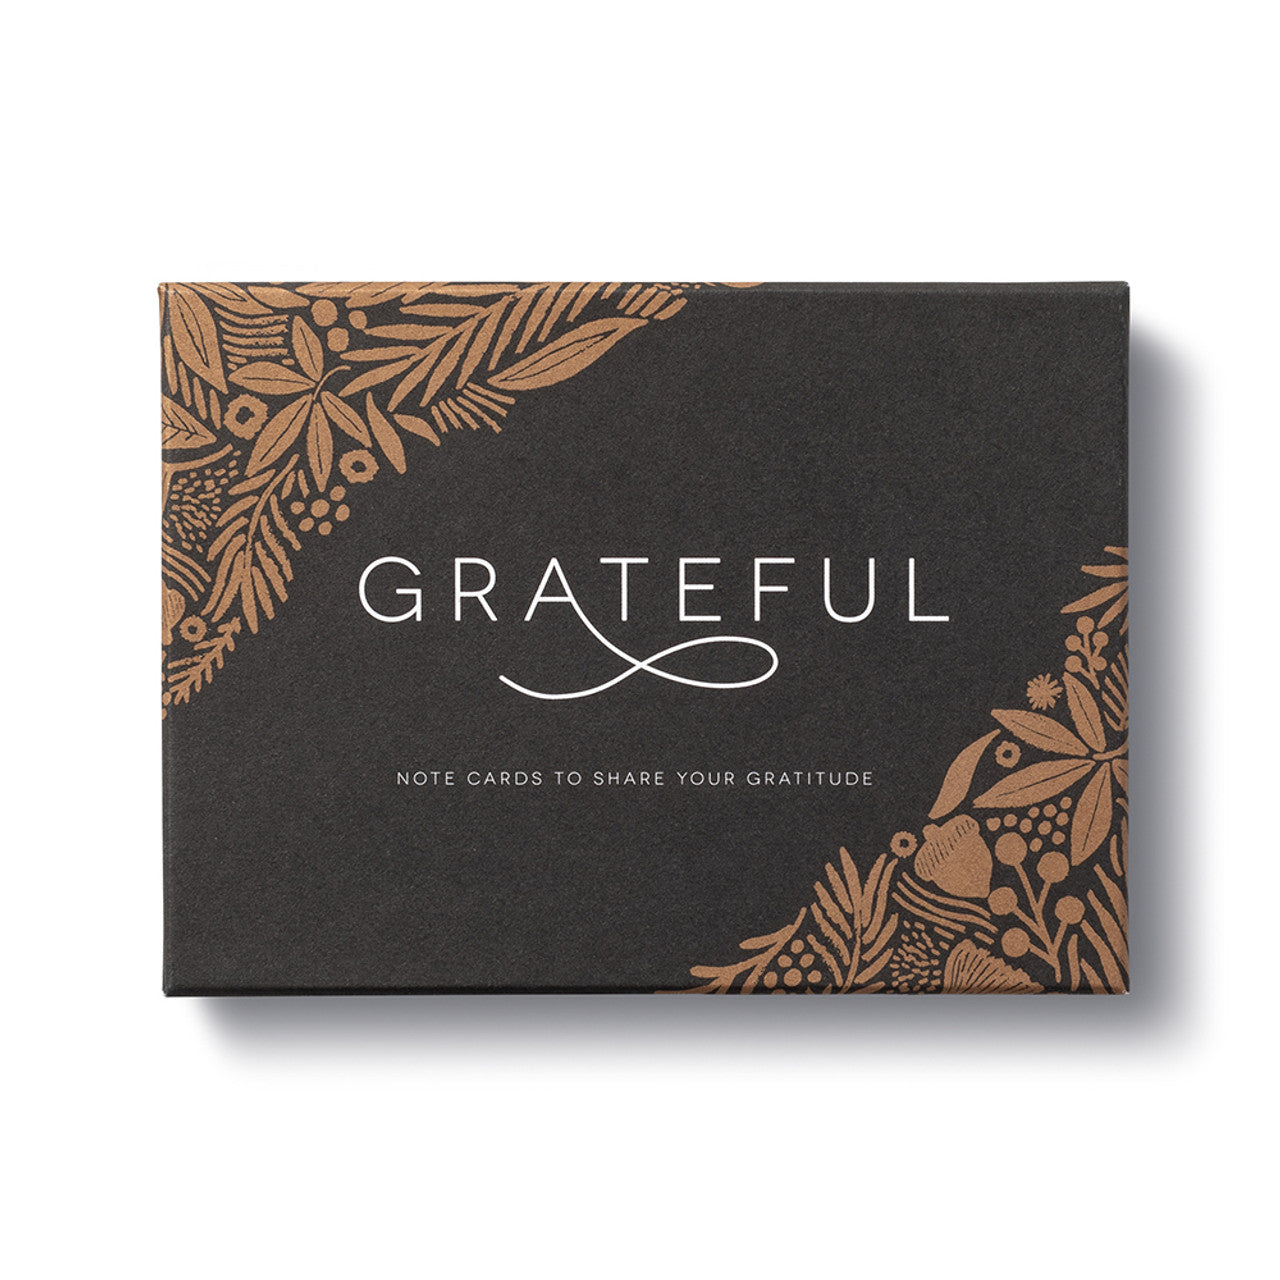 Grateful - Note Cards to Share Your Gratitude